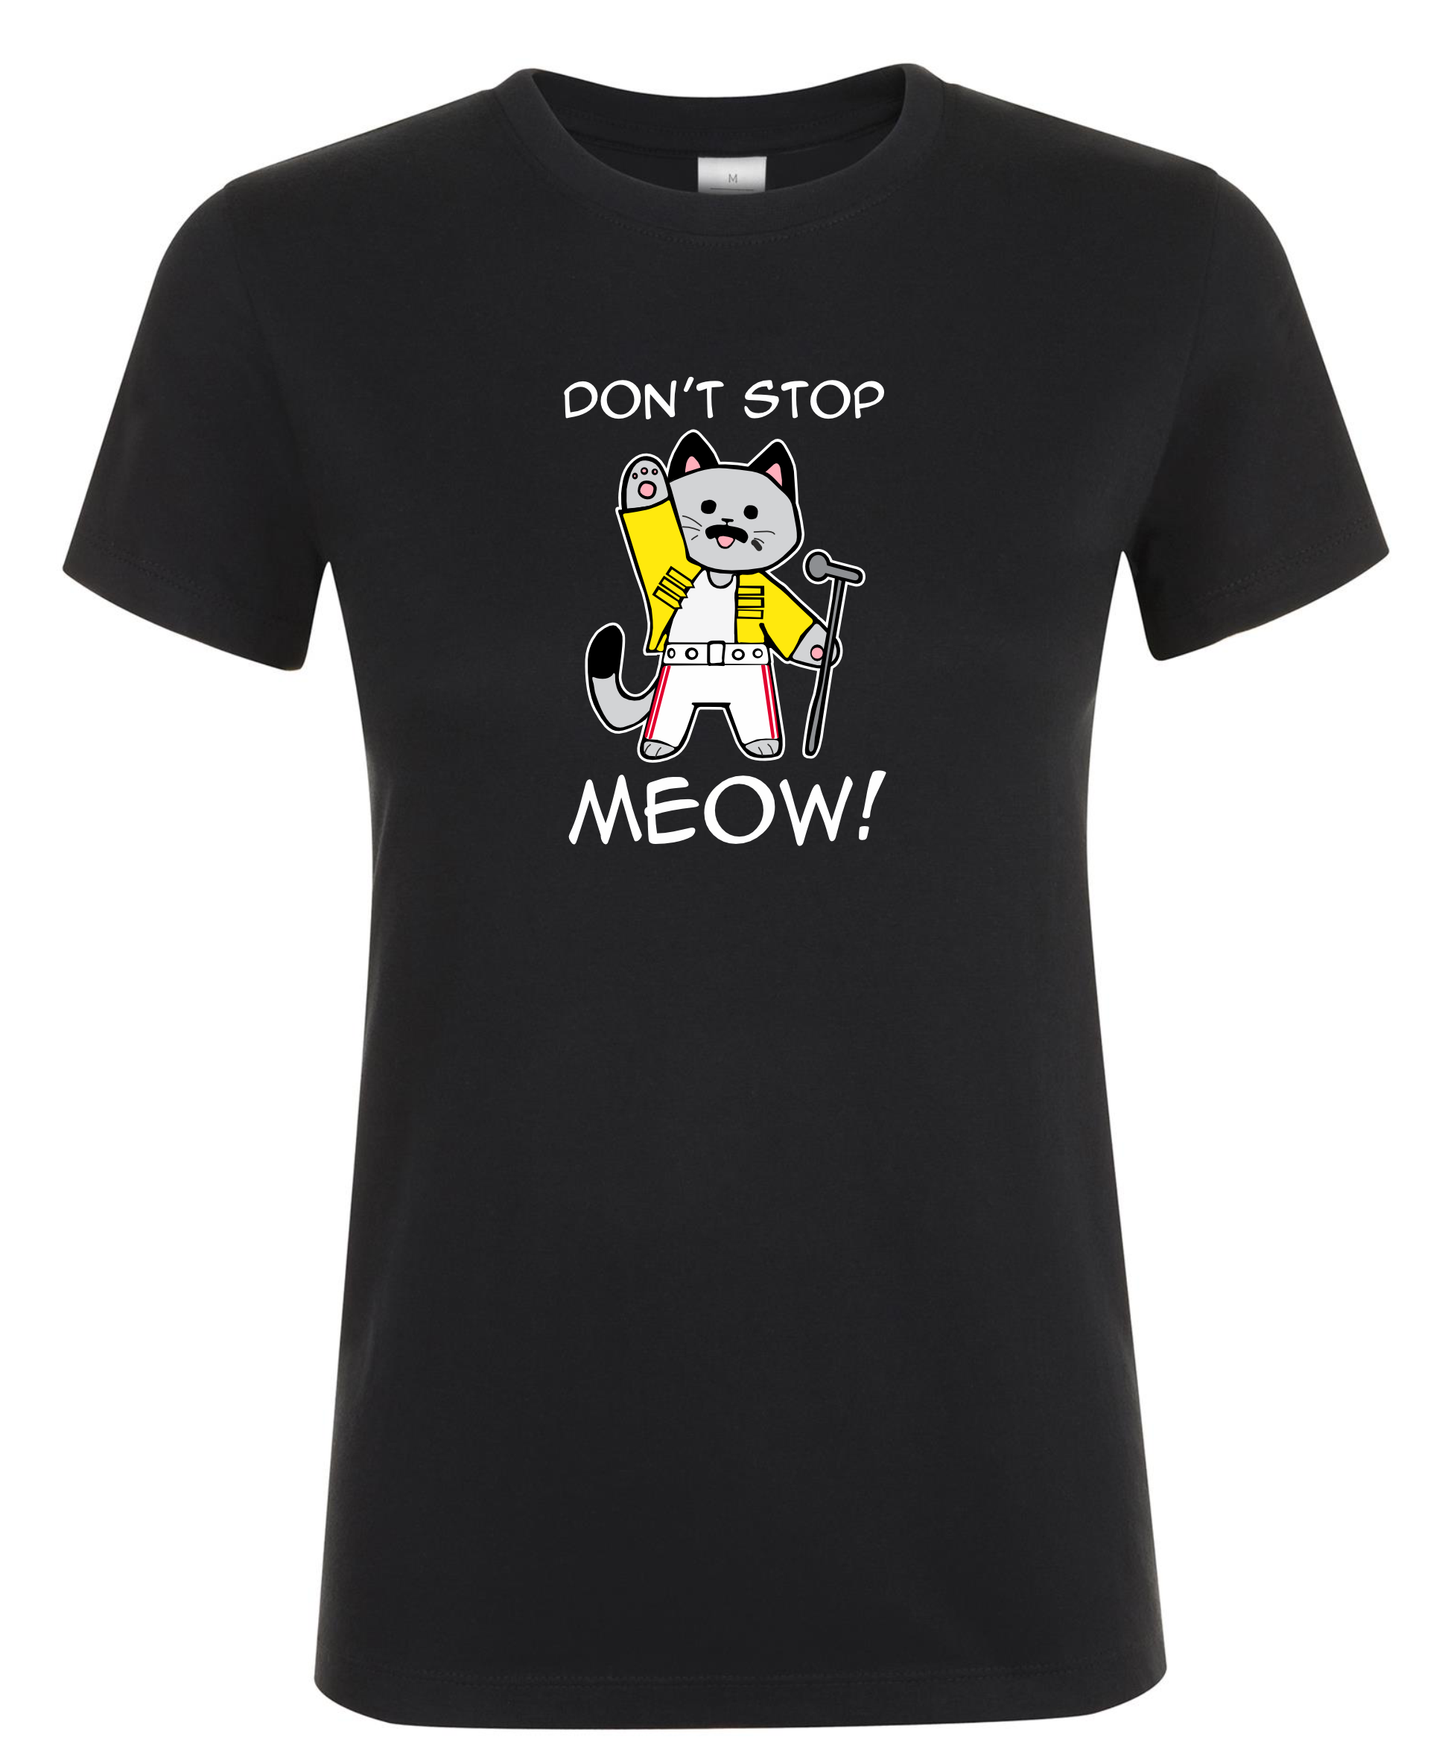 Don't Stop Meow!